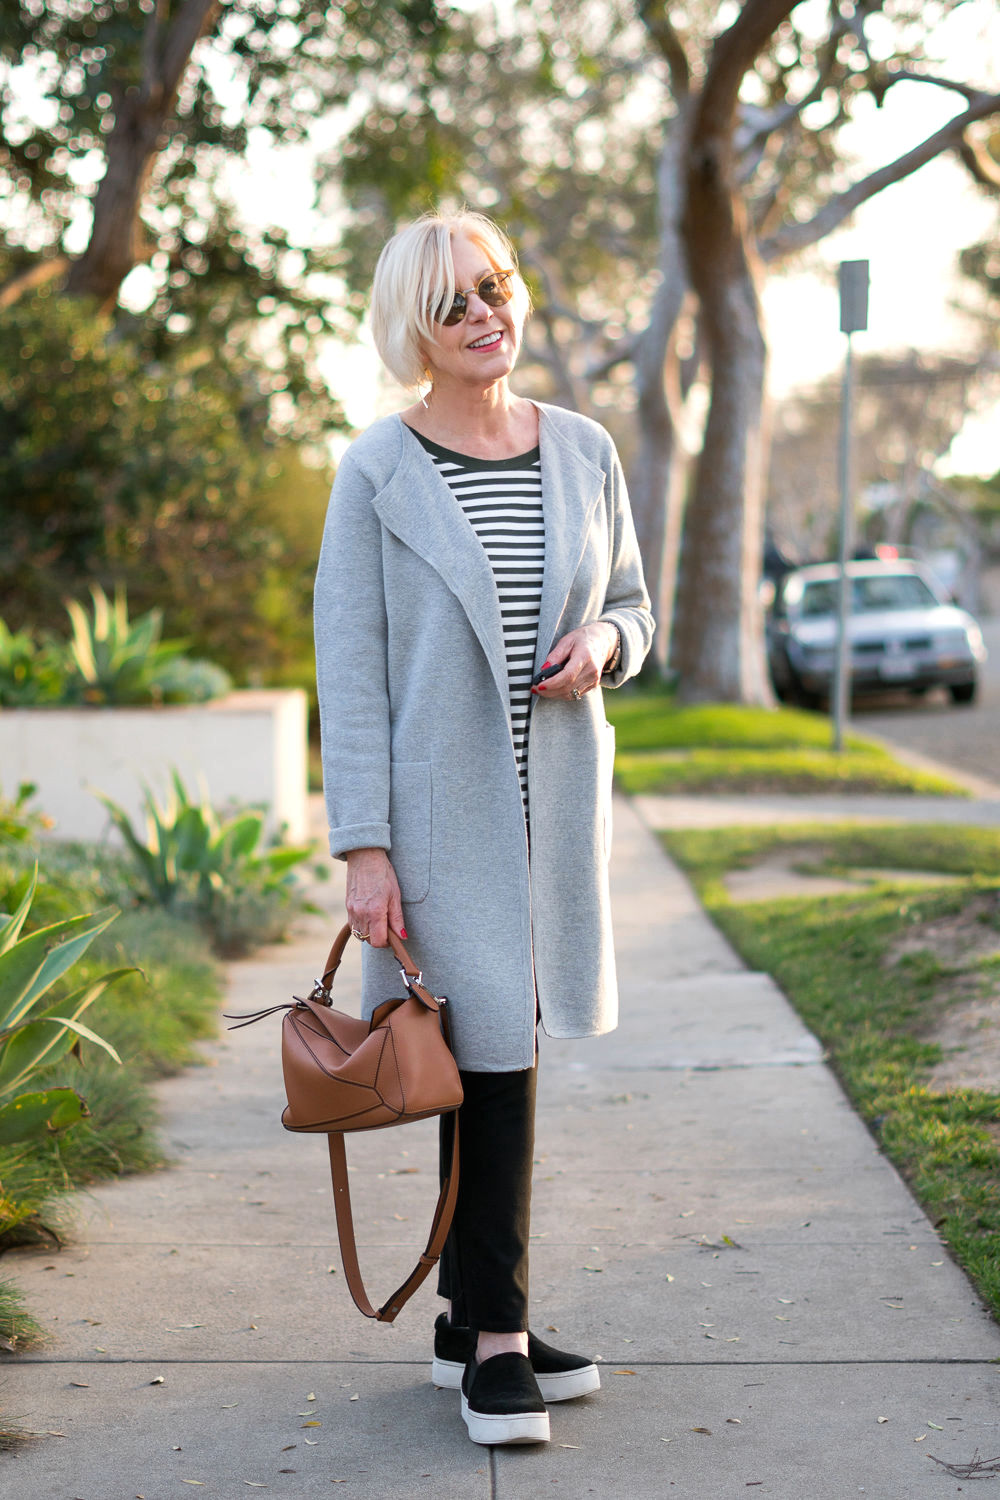 Style blogger Susan B. wears a sporty casual look with a striped tee and grey sweater coat. Details at une femme d'un certain age.